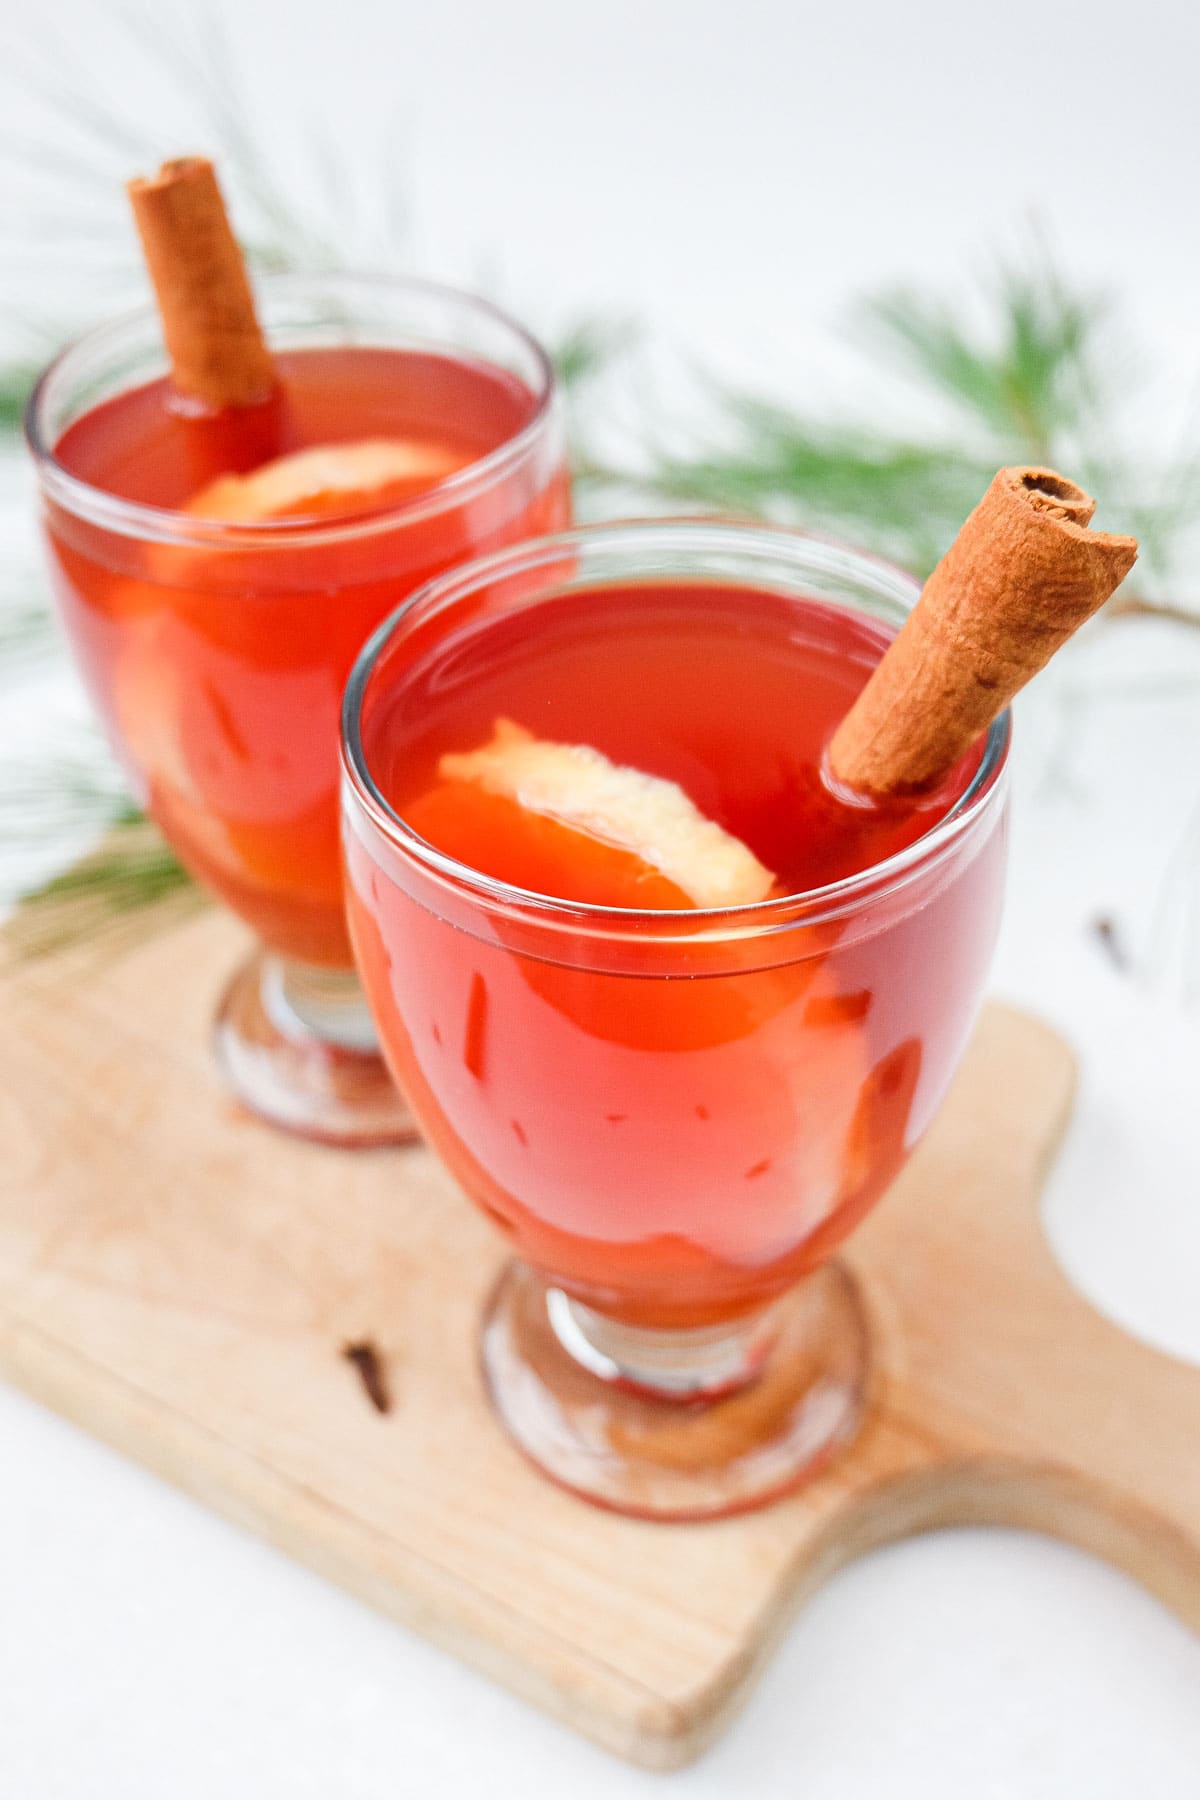 two glasses of red kinderpunsch on wooden board with cinnamon sticks.